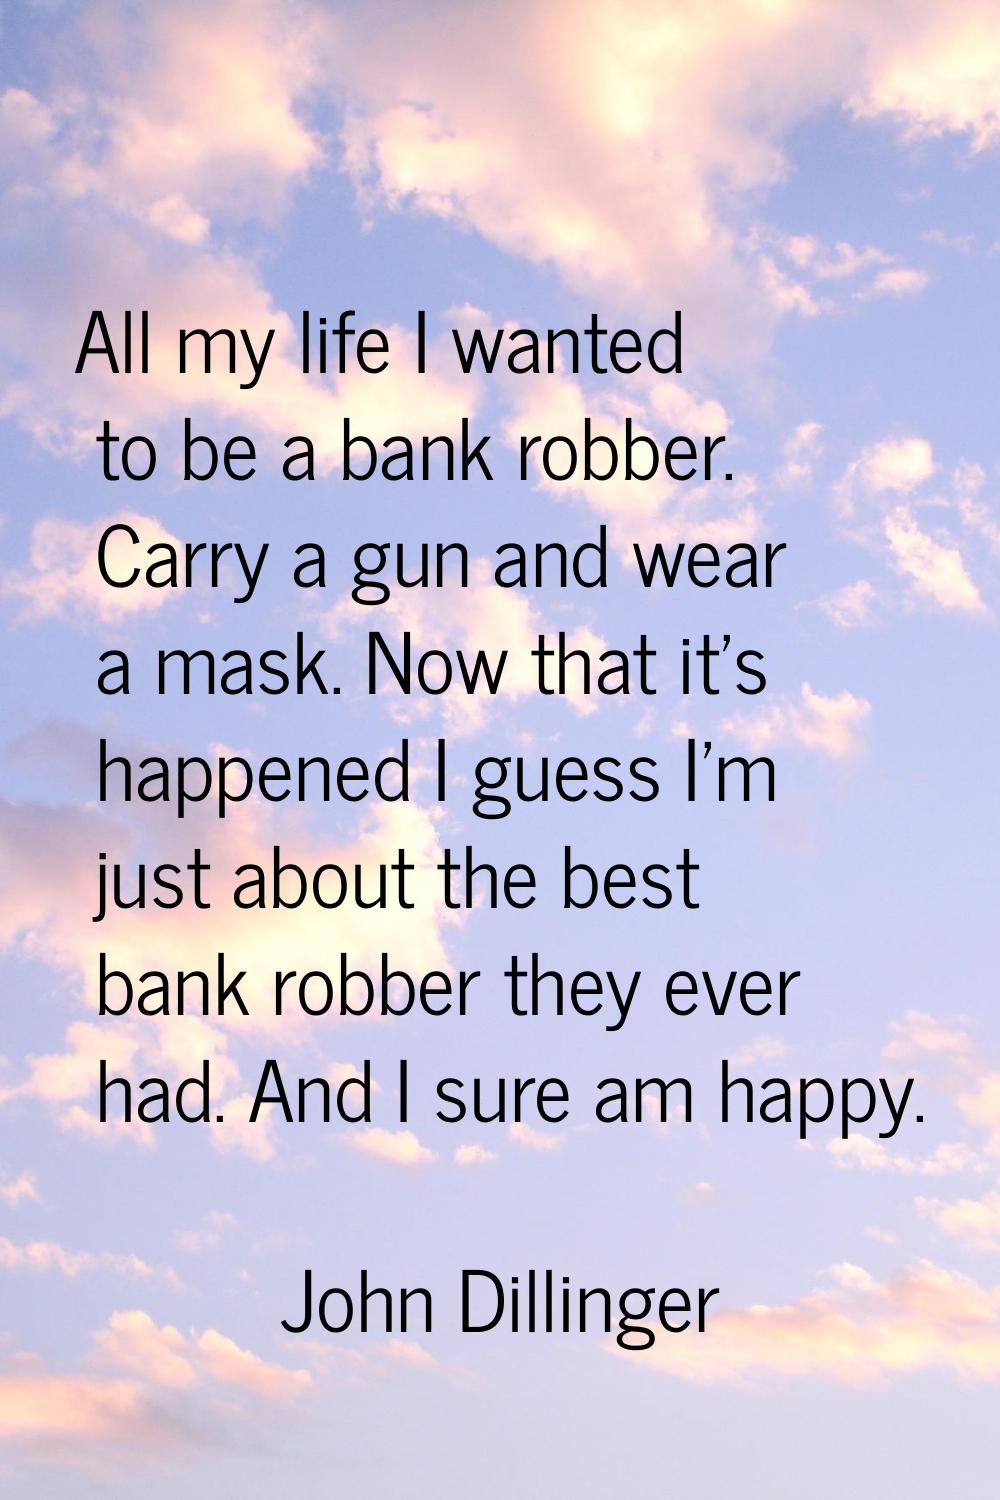 All my life I wanted to be a bank robber. Carry a gun and wear a mask. Now that it's happened I gue